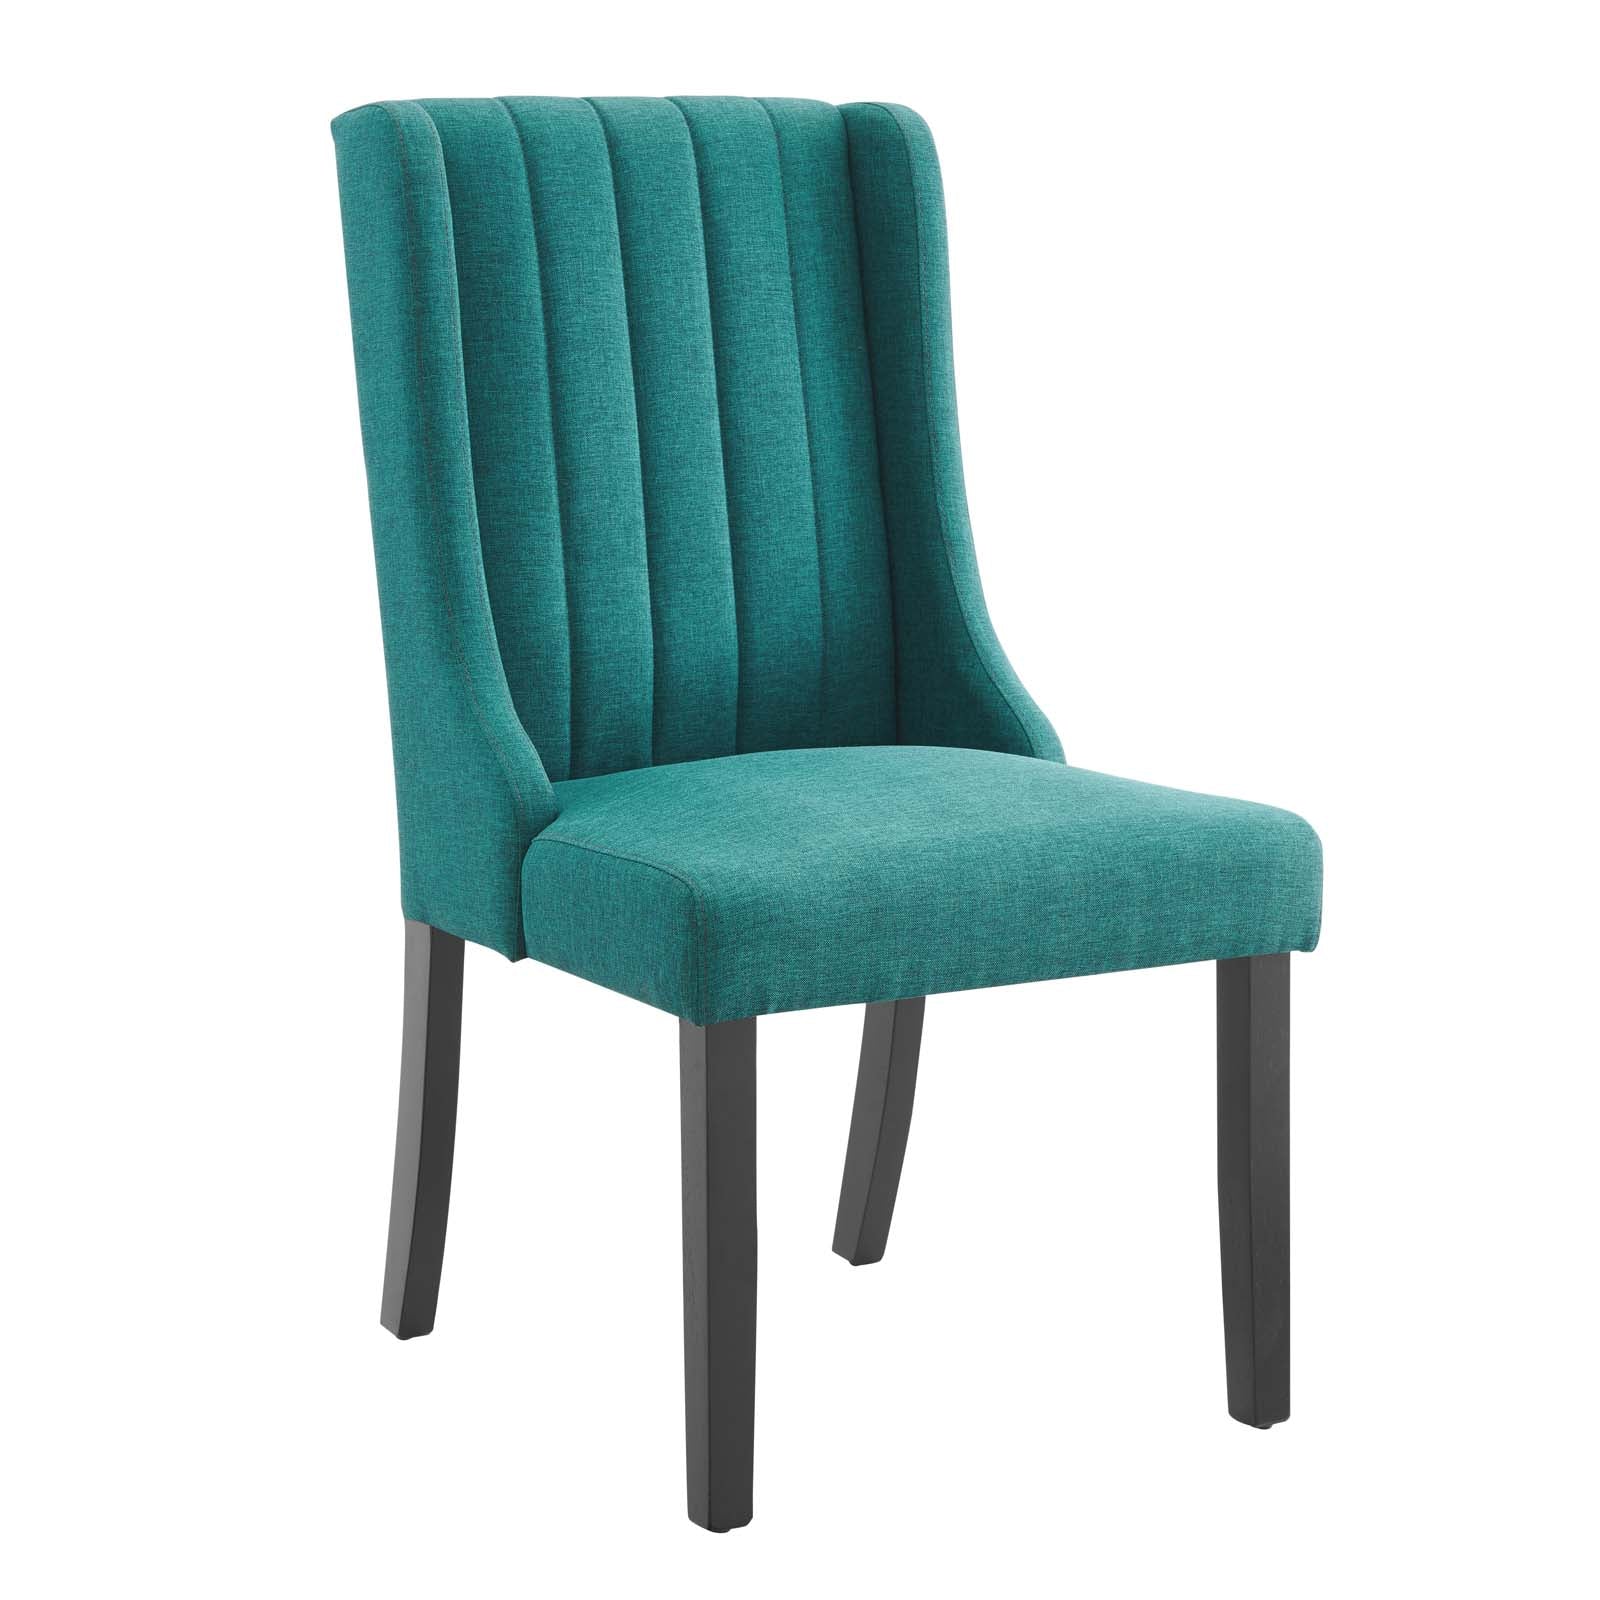 Modway Dining Chairs - Renew Parsons Fabric Dining Side Chairs - Set of 2 Teal